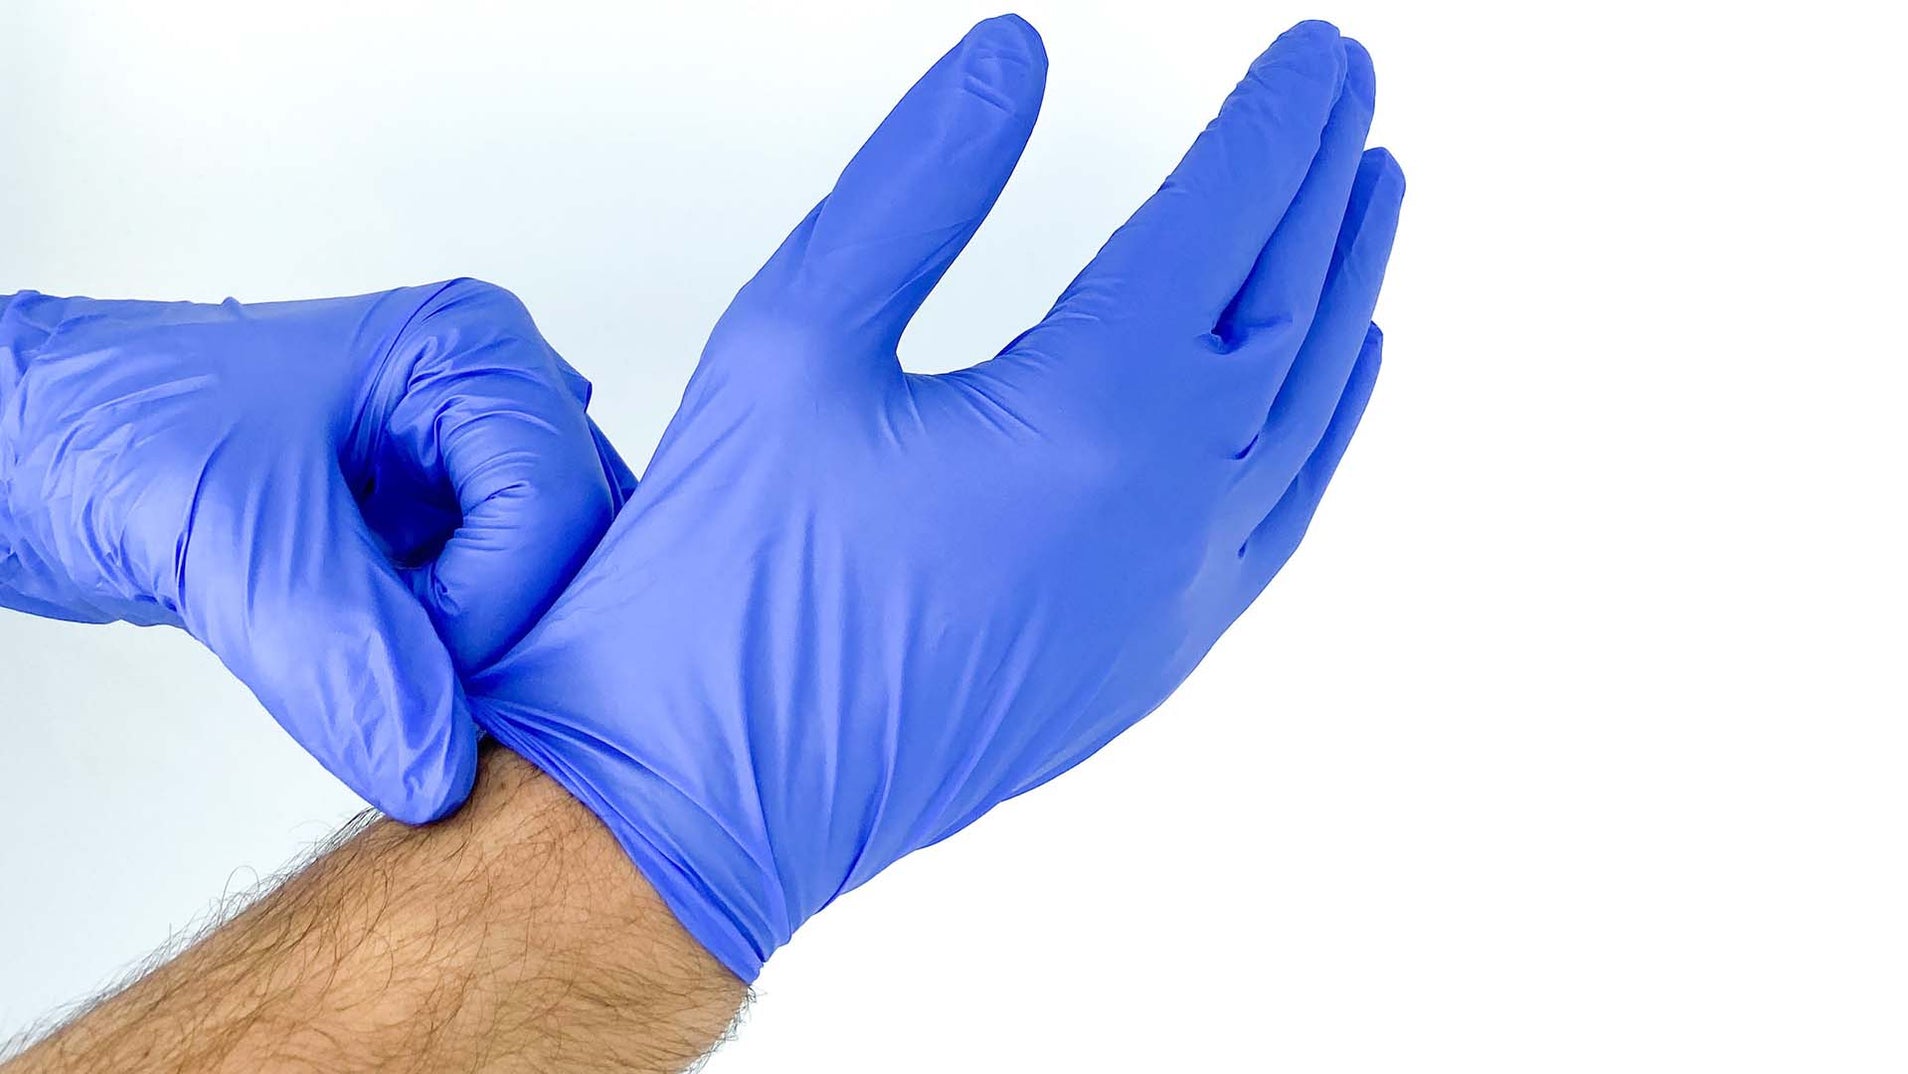 person putting on blue nitrile gloves